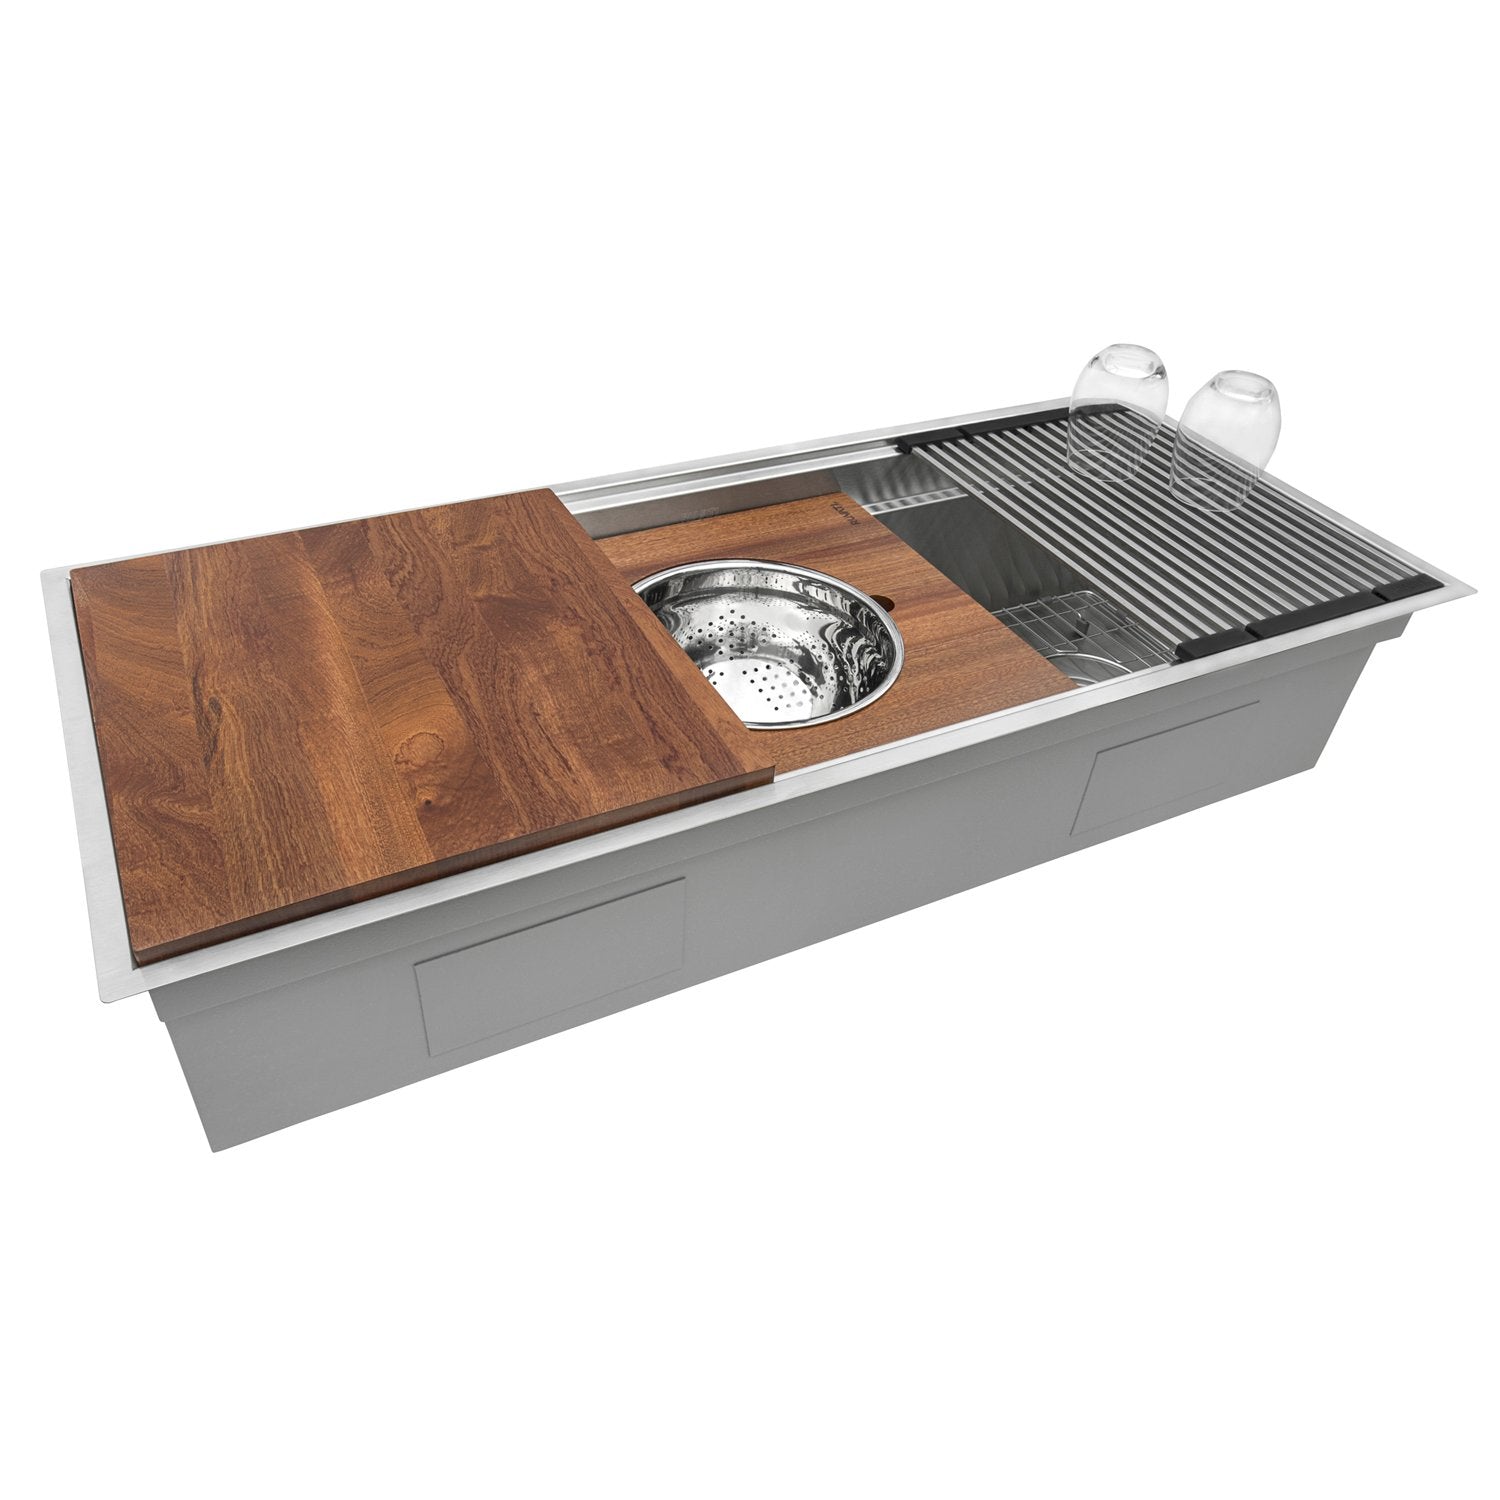 17" x 16" Dual Tier Wood platform for Mixing Bowl and Colander for Ruvati Workstation Sinks RVA1244